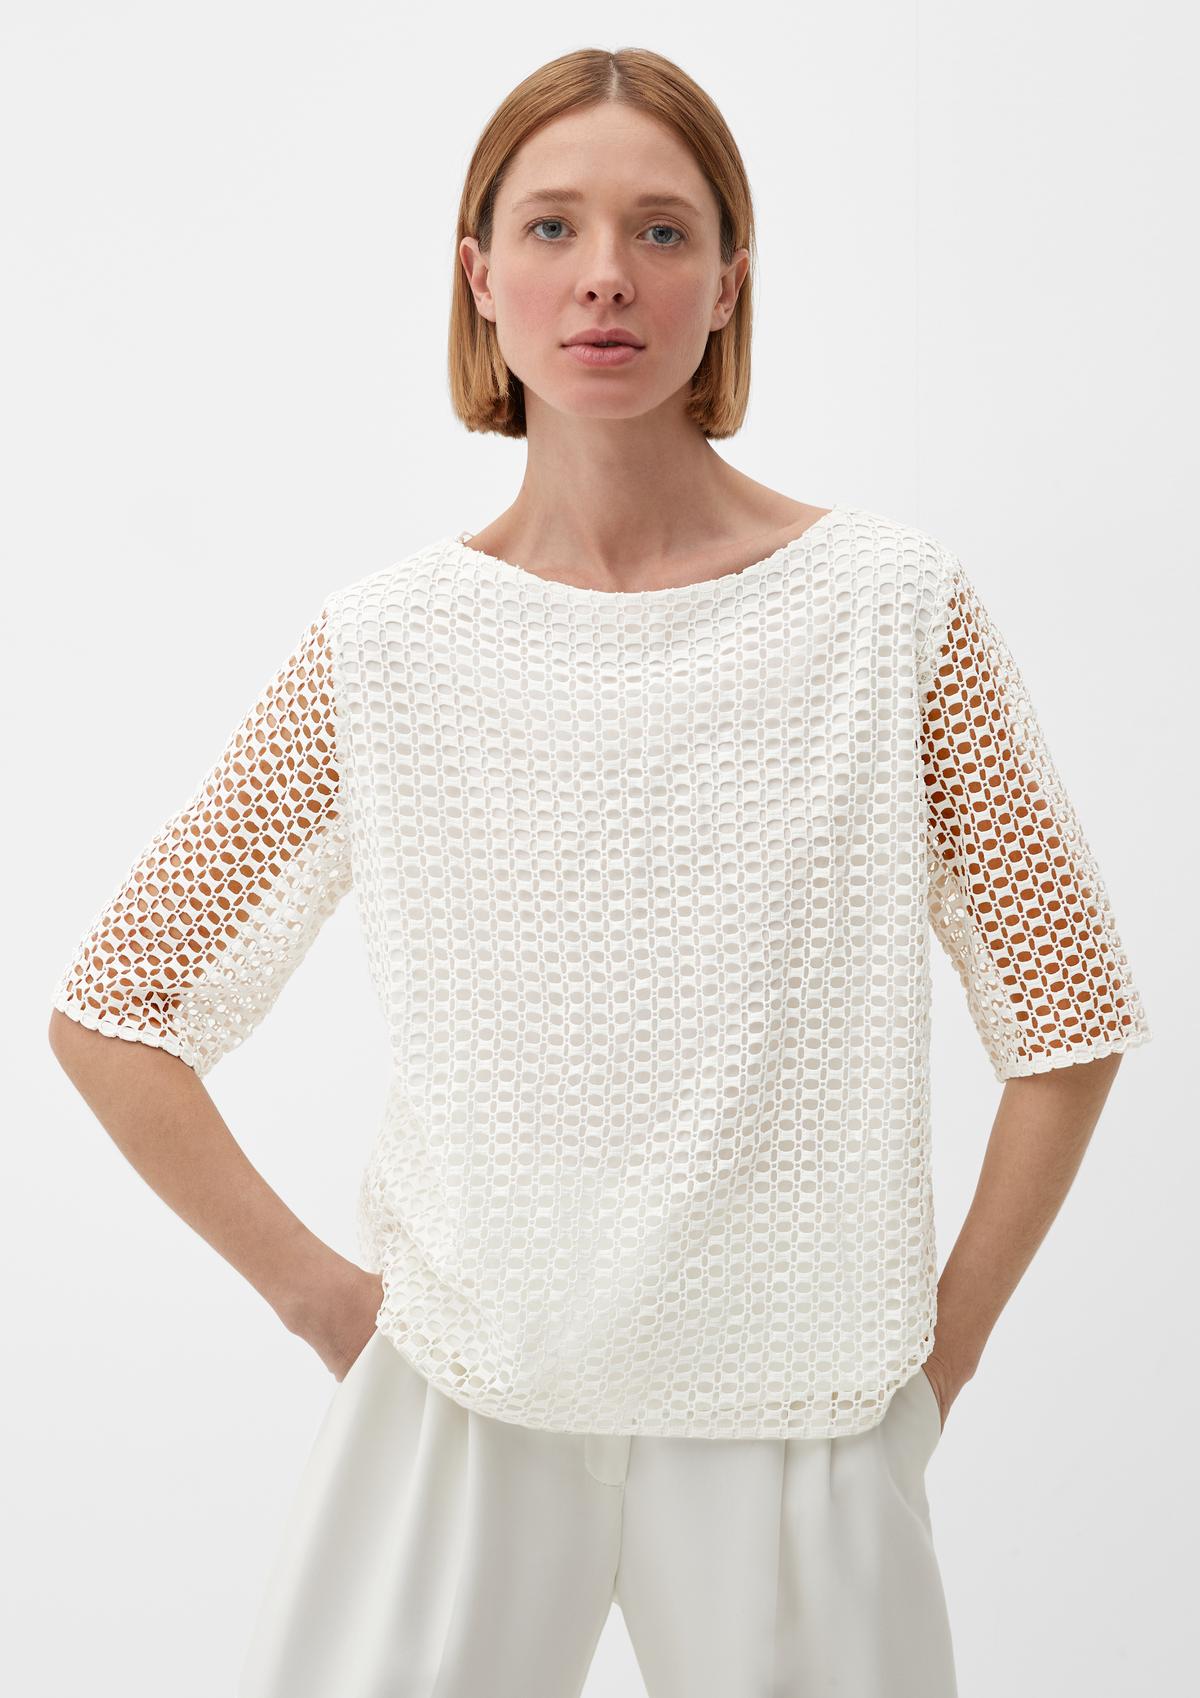 s.Oliver Blouse made of crocheted lace